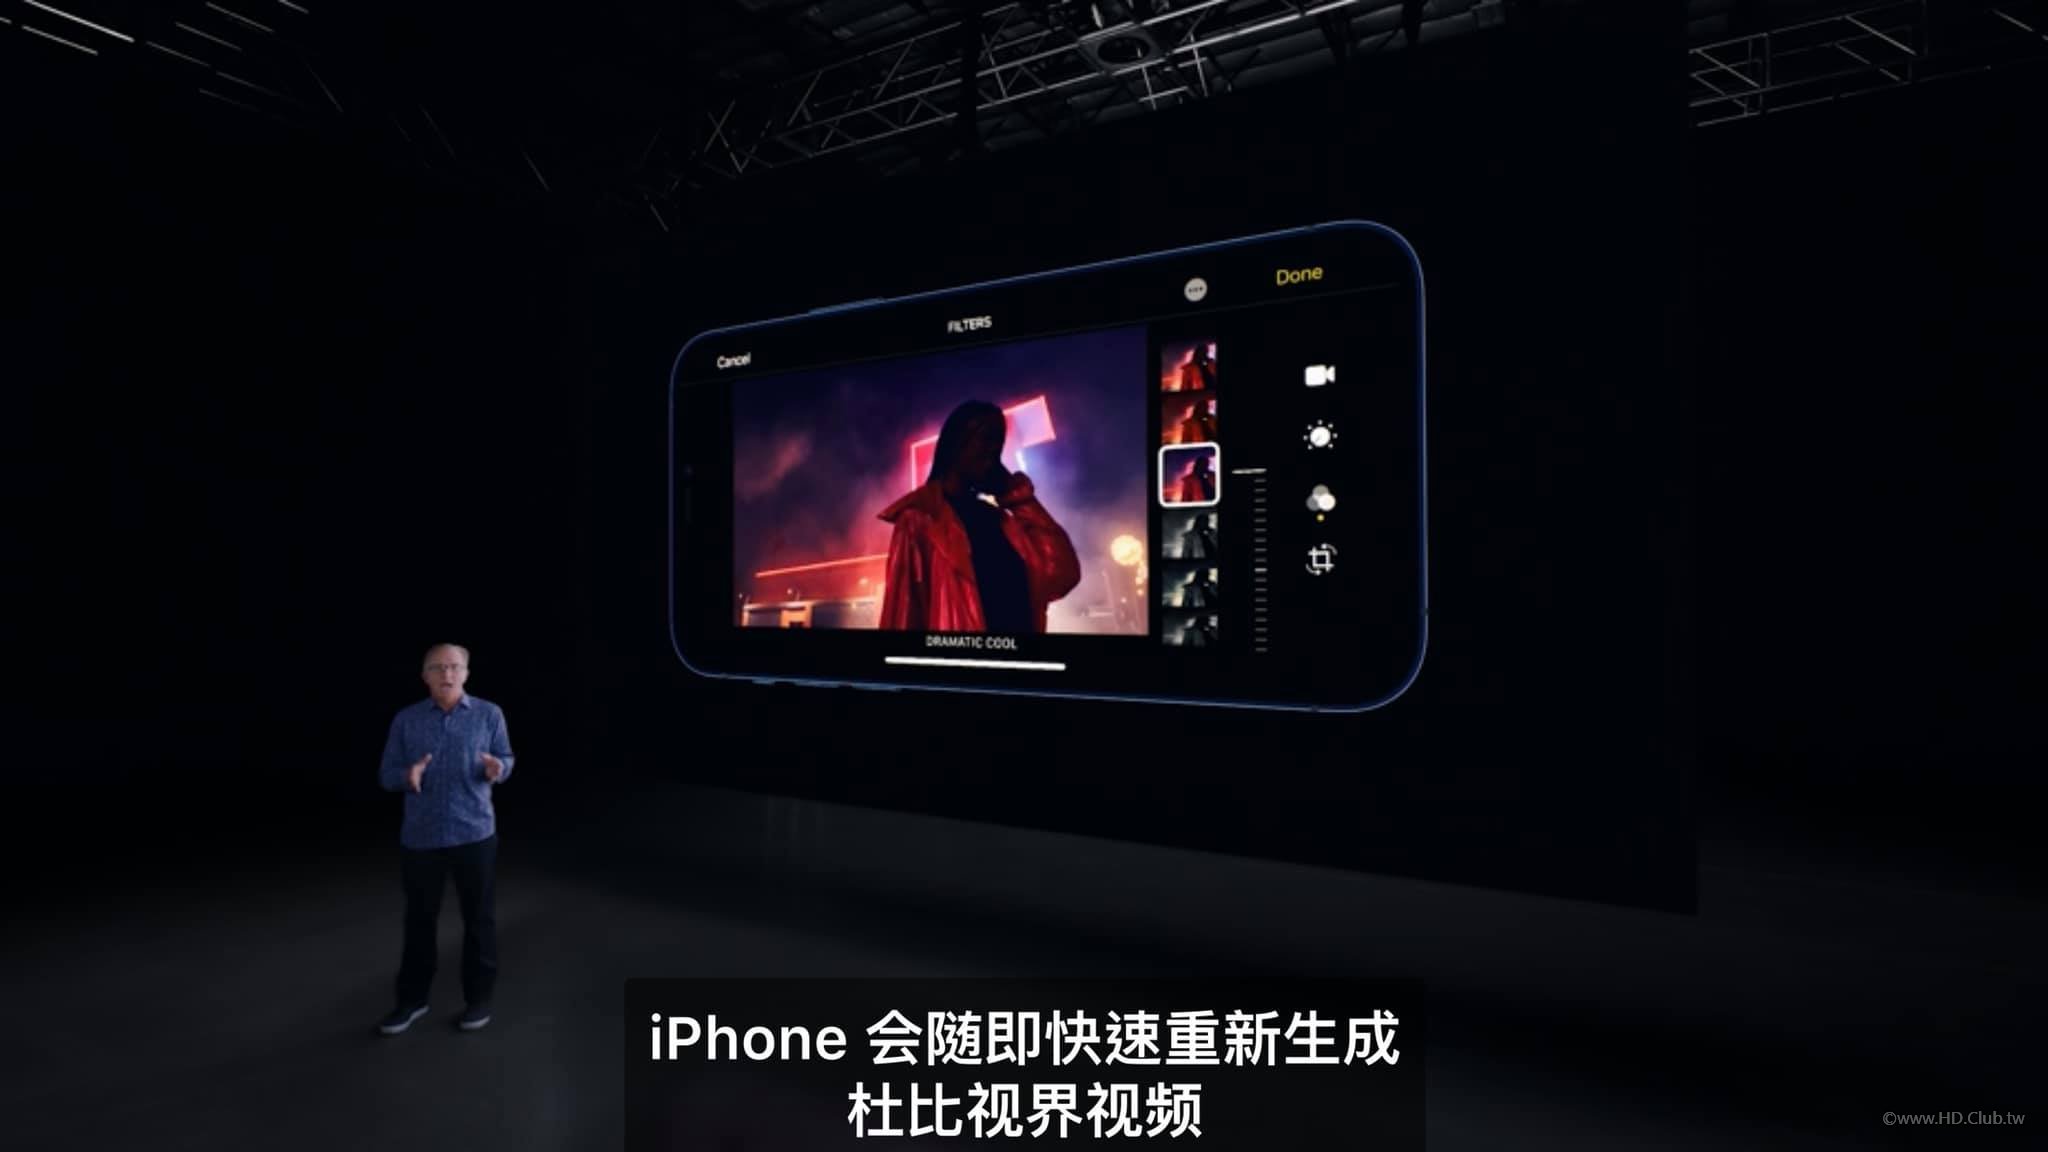 iPhone 12 Pro - Dolby Vision